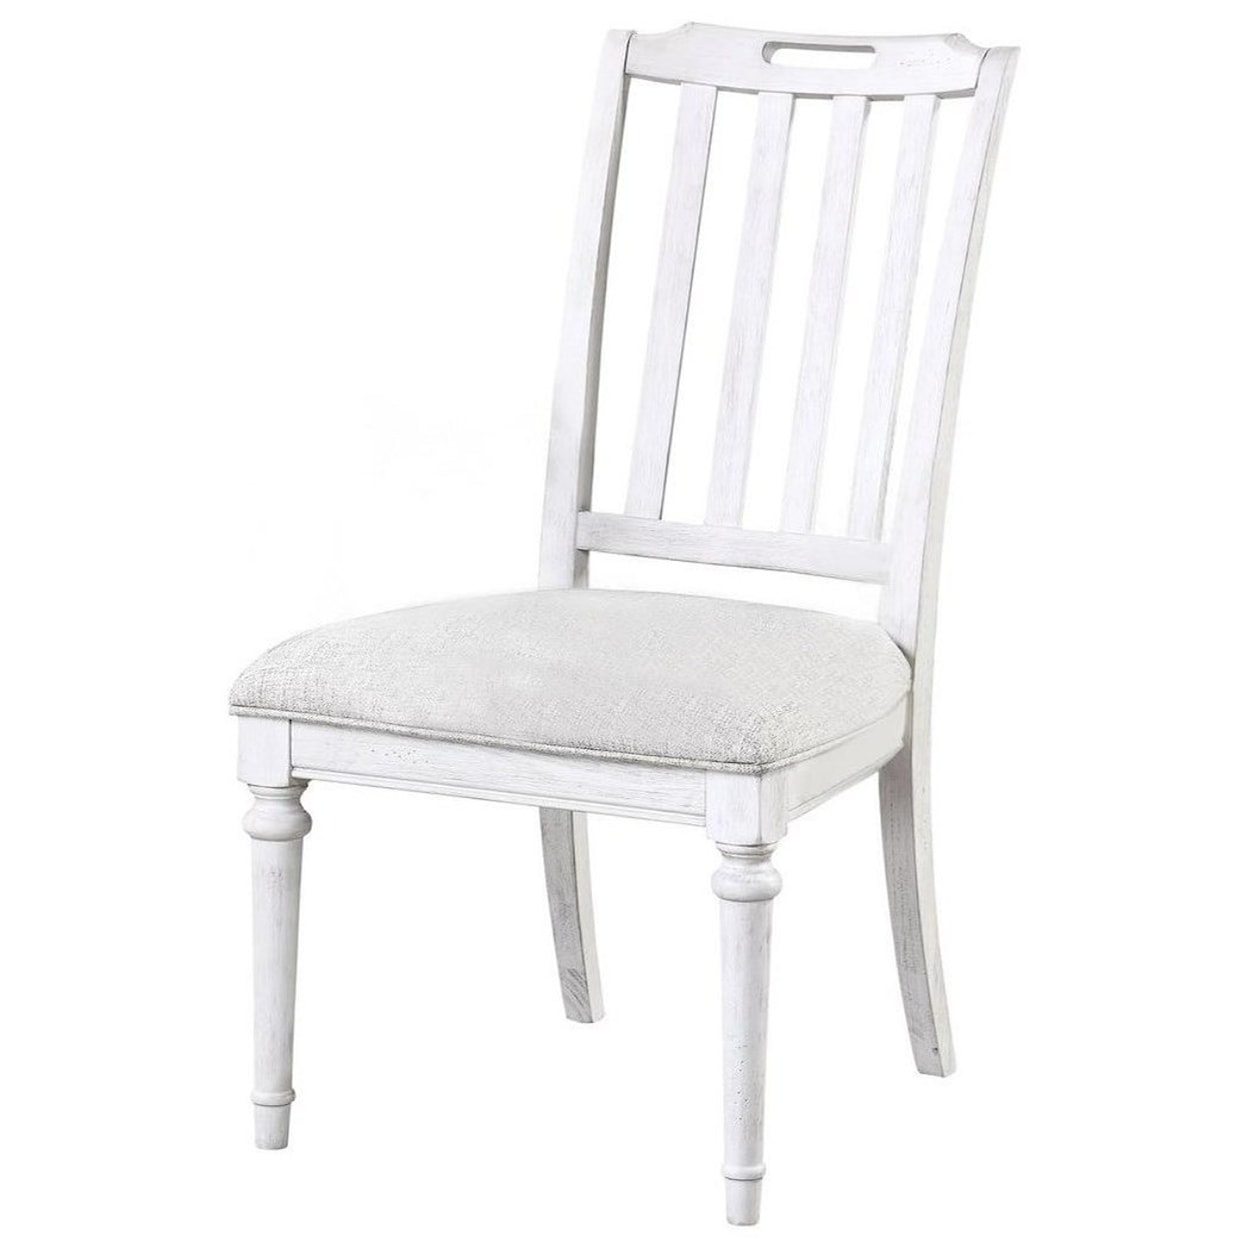 Panama Jack by Palmetto Home Sonoma Side Chair